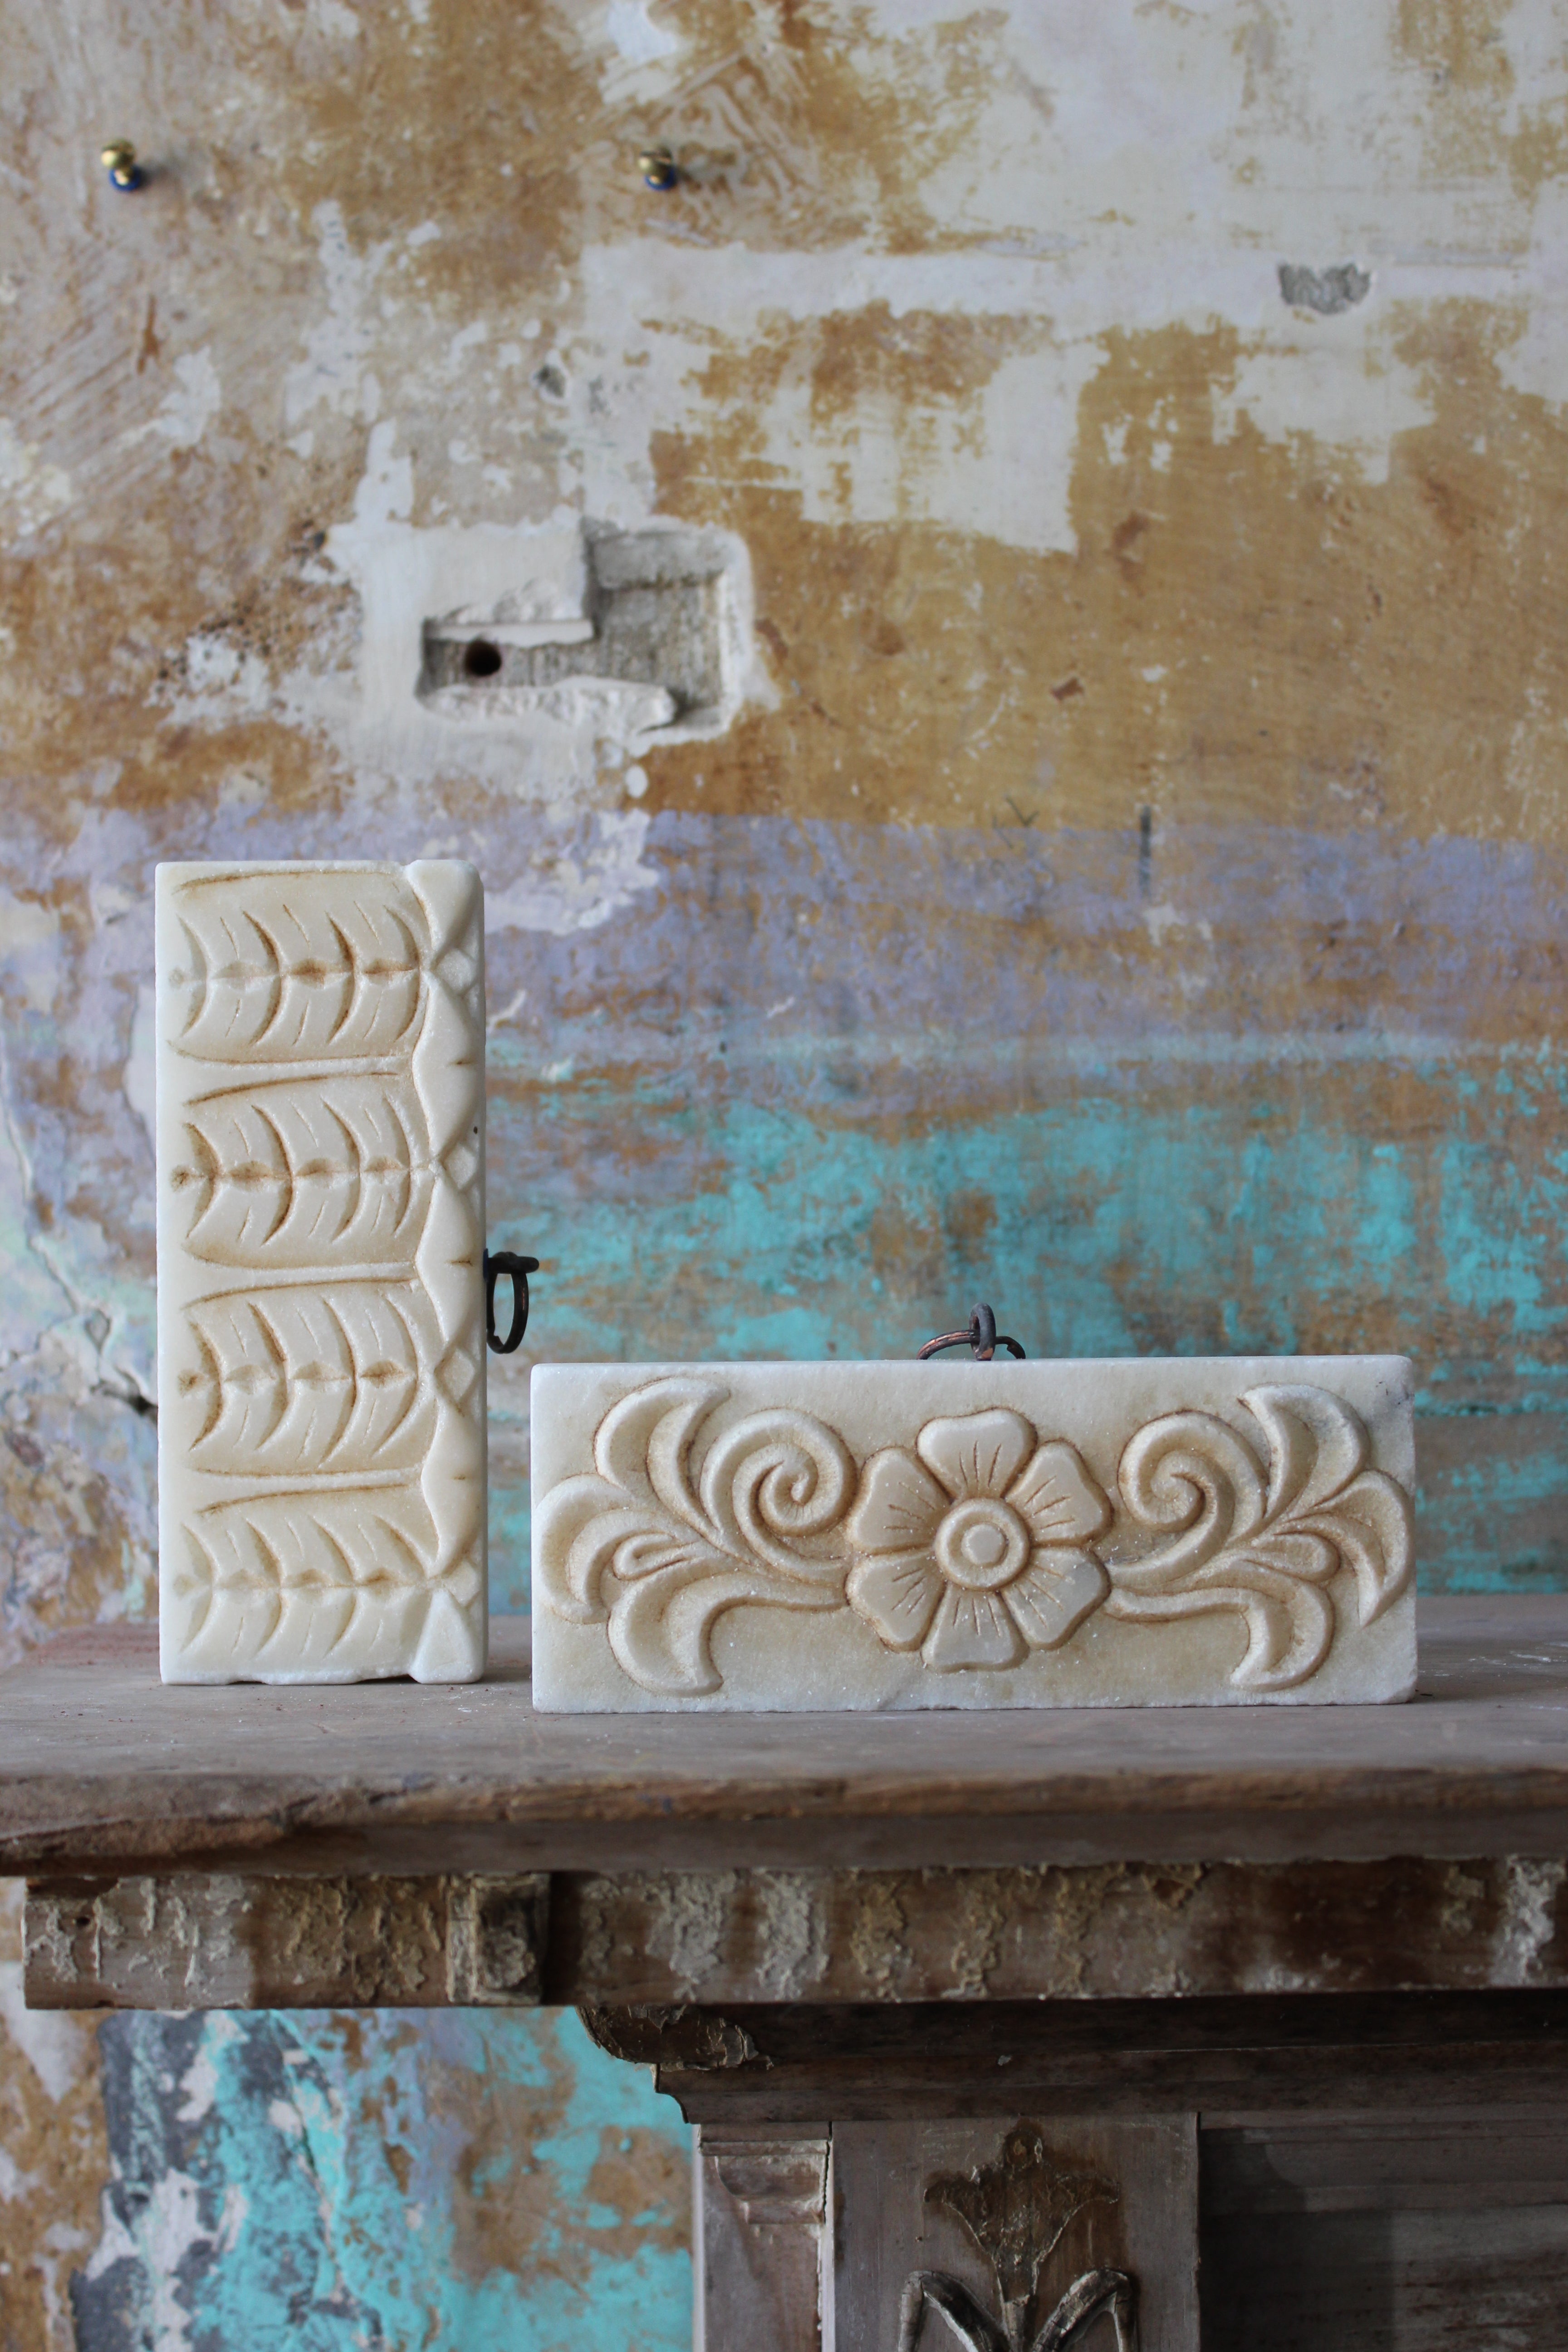 Early 20th century carved decorative tablets, previously part of a larger architectural feature or fireplace. One with a floral organic relief and the other a continues pattern. 

The sections are well carved, crisp and has a good decorative patina,